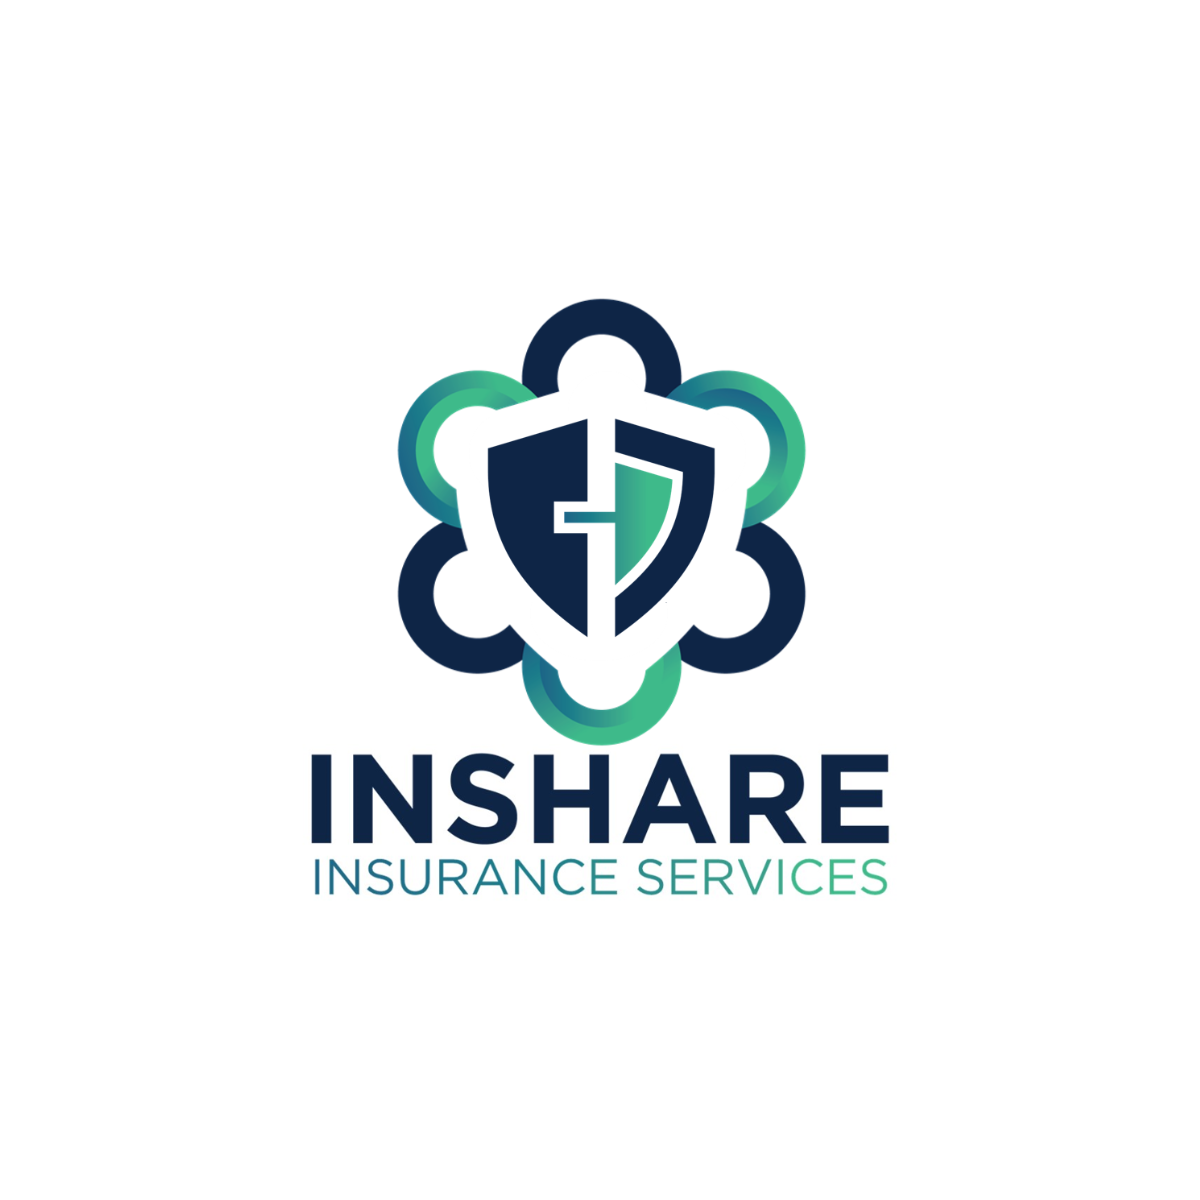 Inshare Insurance Services logo.